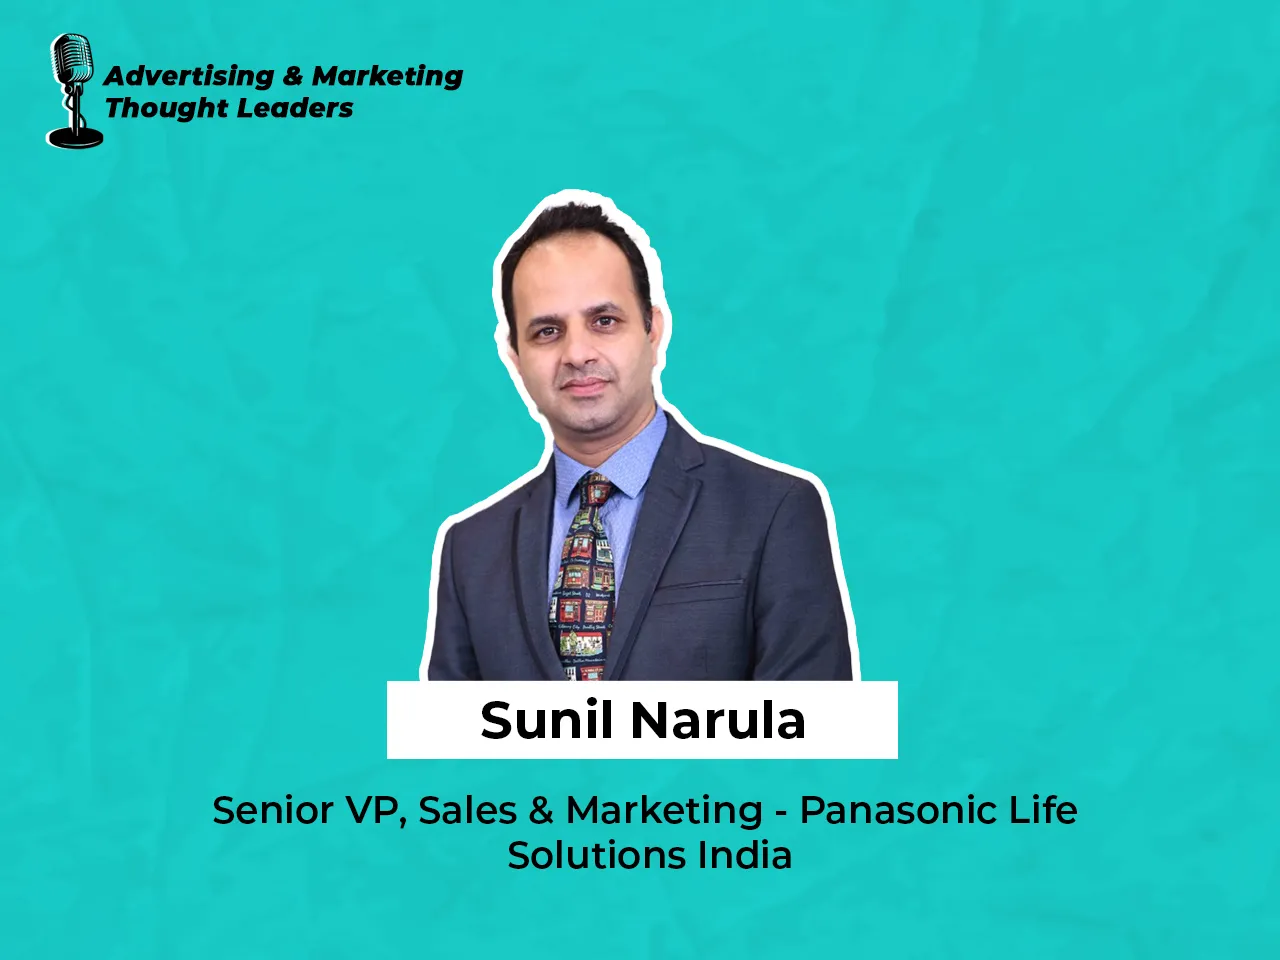 Sunil Narula on how Panasonic Life Solutions India engages consumers through an influencer-driven marketing strategy